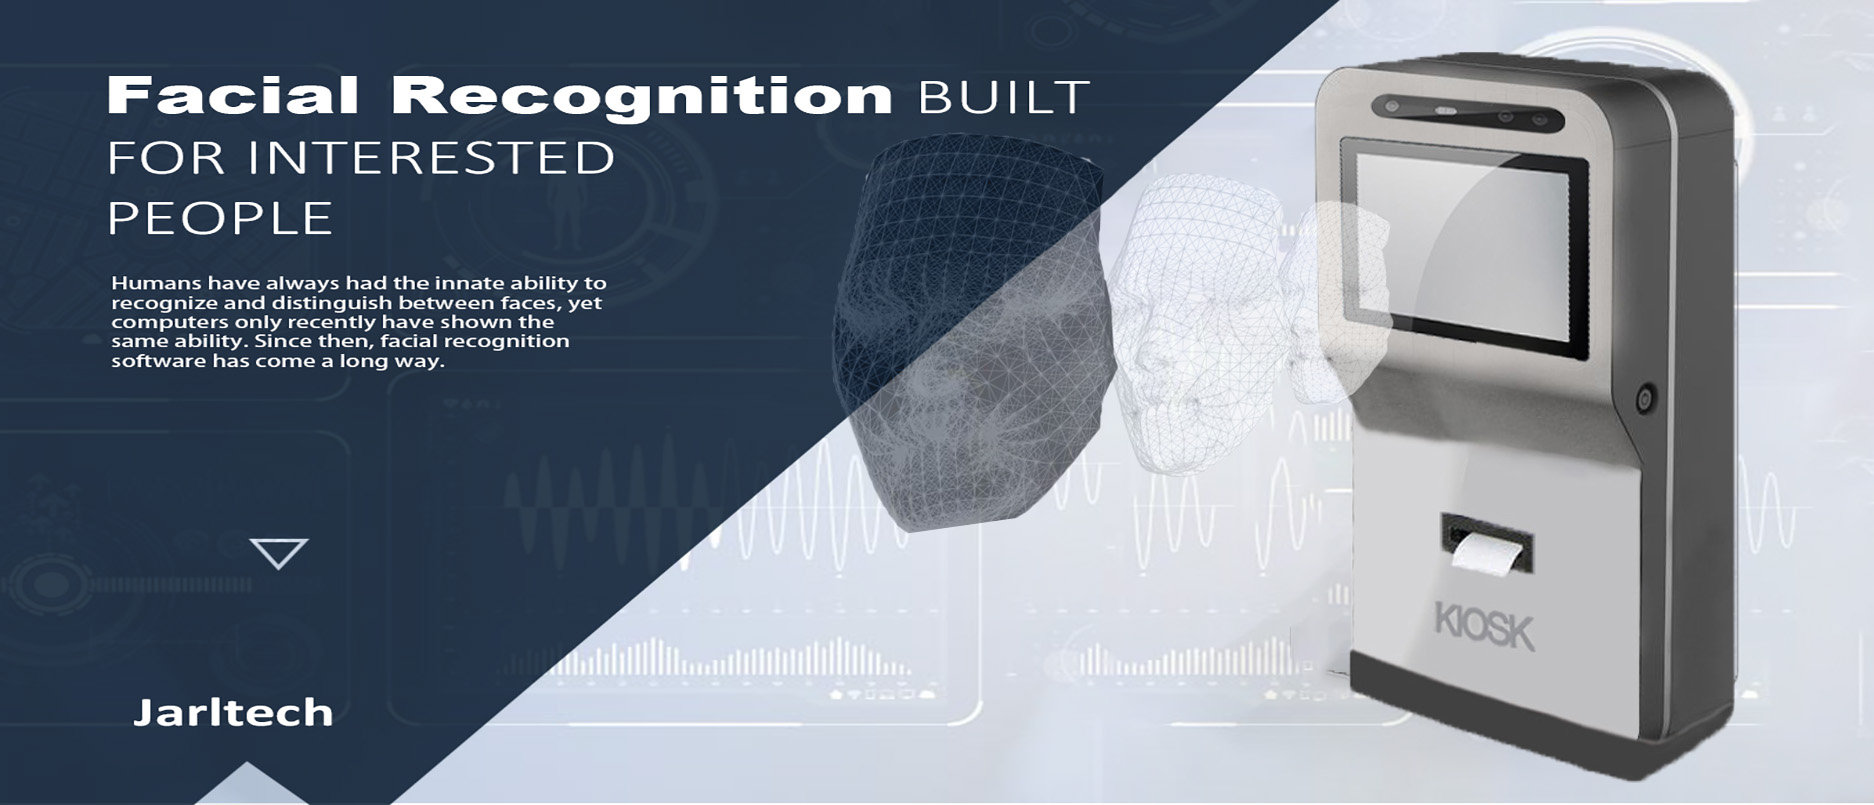 Overview of Facial Recognition Technology